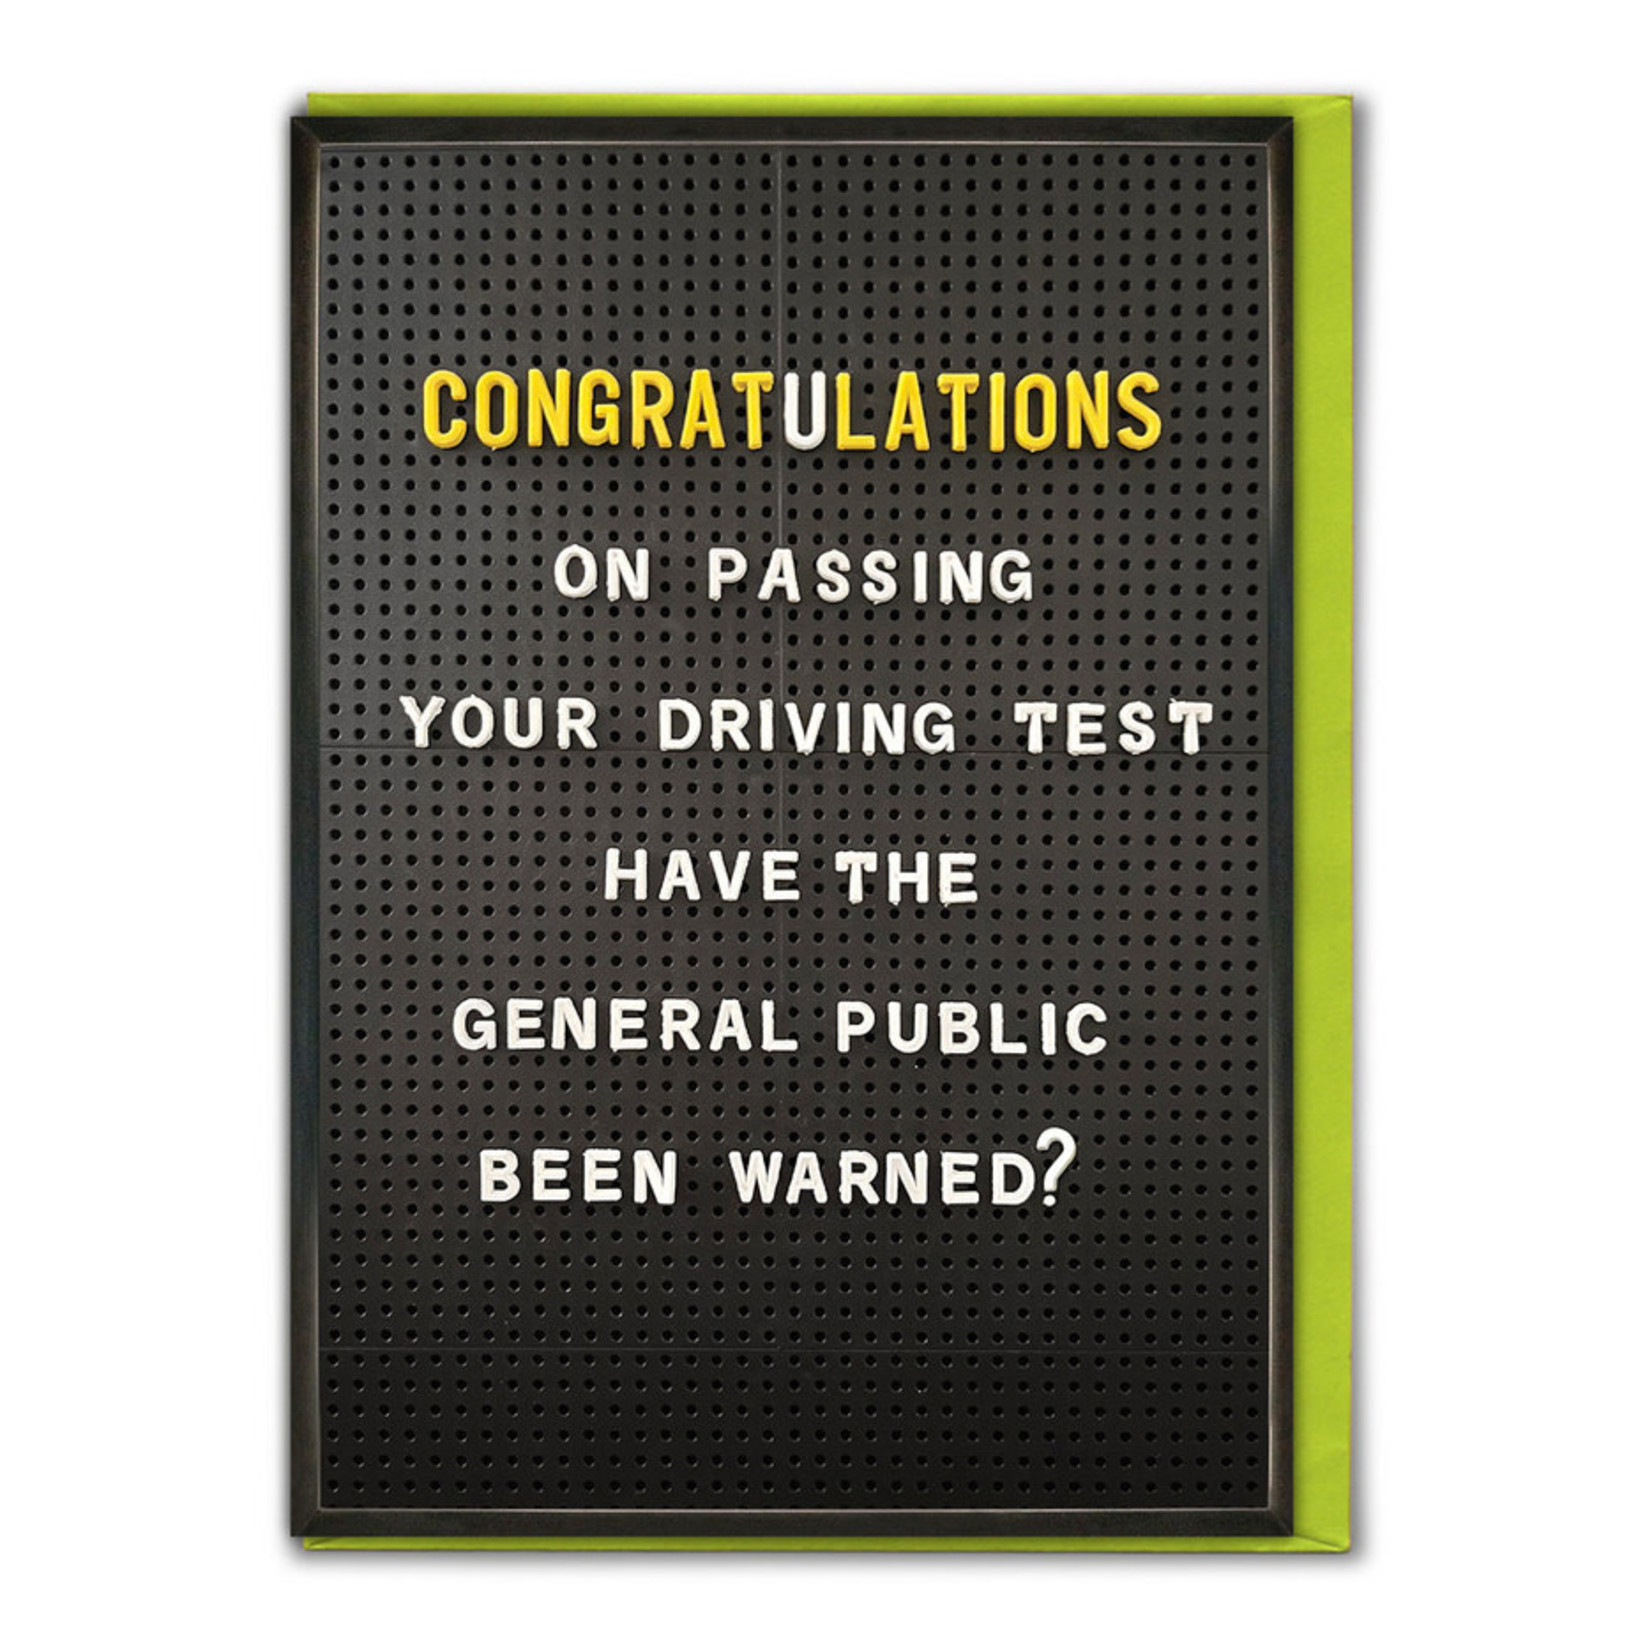 WORDY CARDS Driving Test Congratulations warn General Public Card